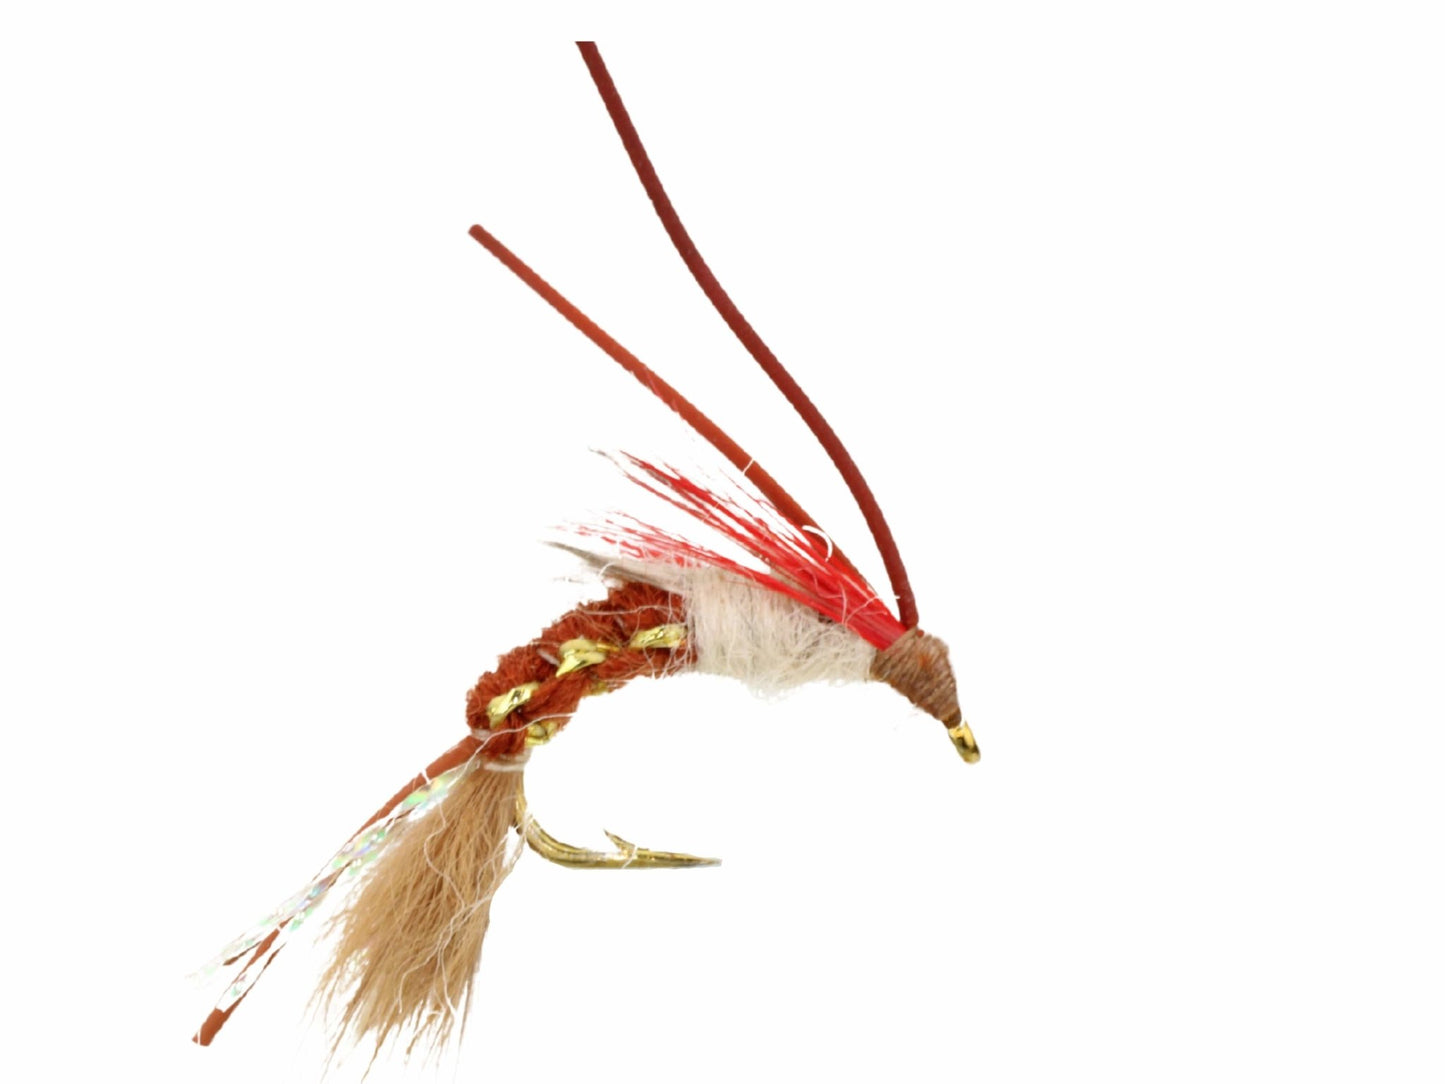 Wild Water Fly Fishing Woven Brown Caddis with Rubber Legs, Size 10, Qty. 6 - Angler's Pro Tackle & Outdoors